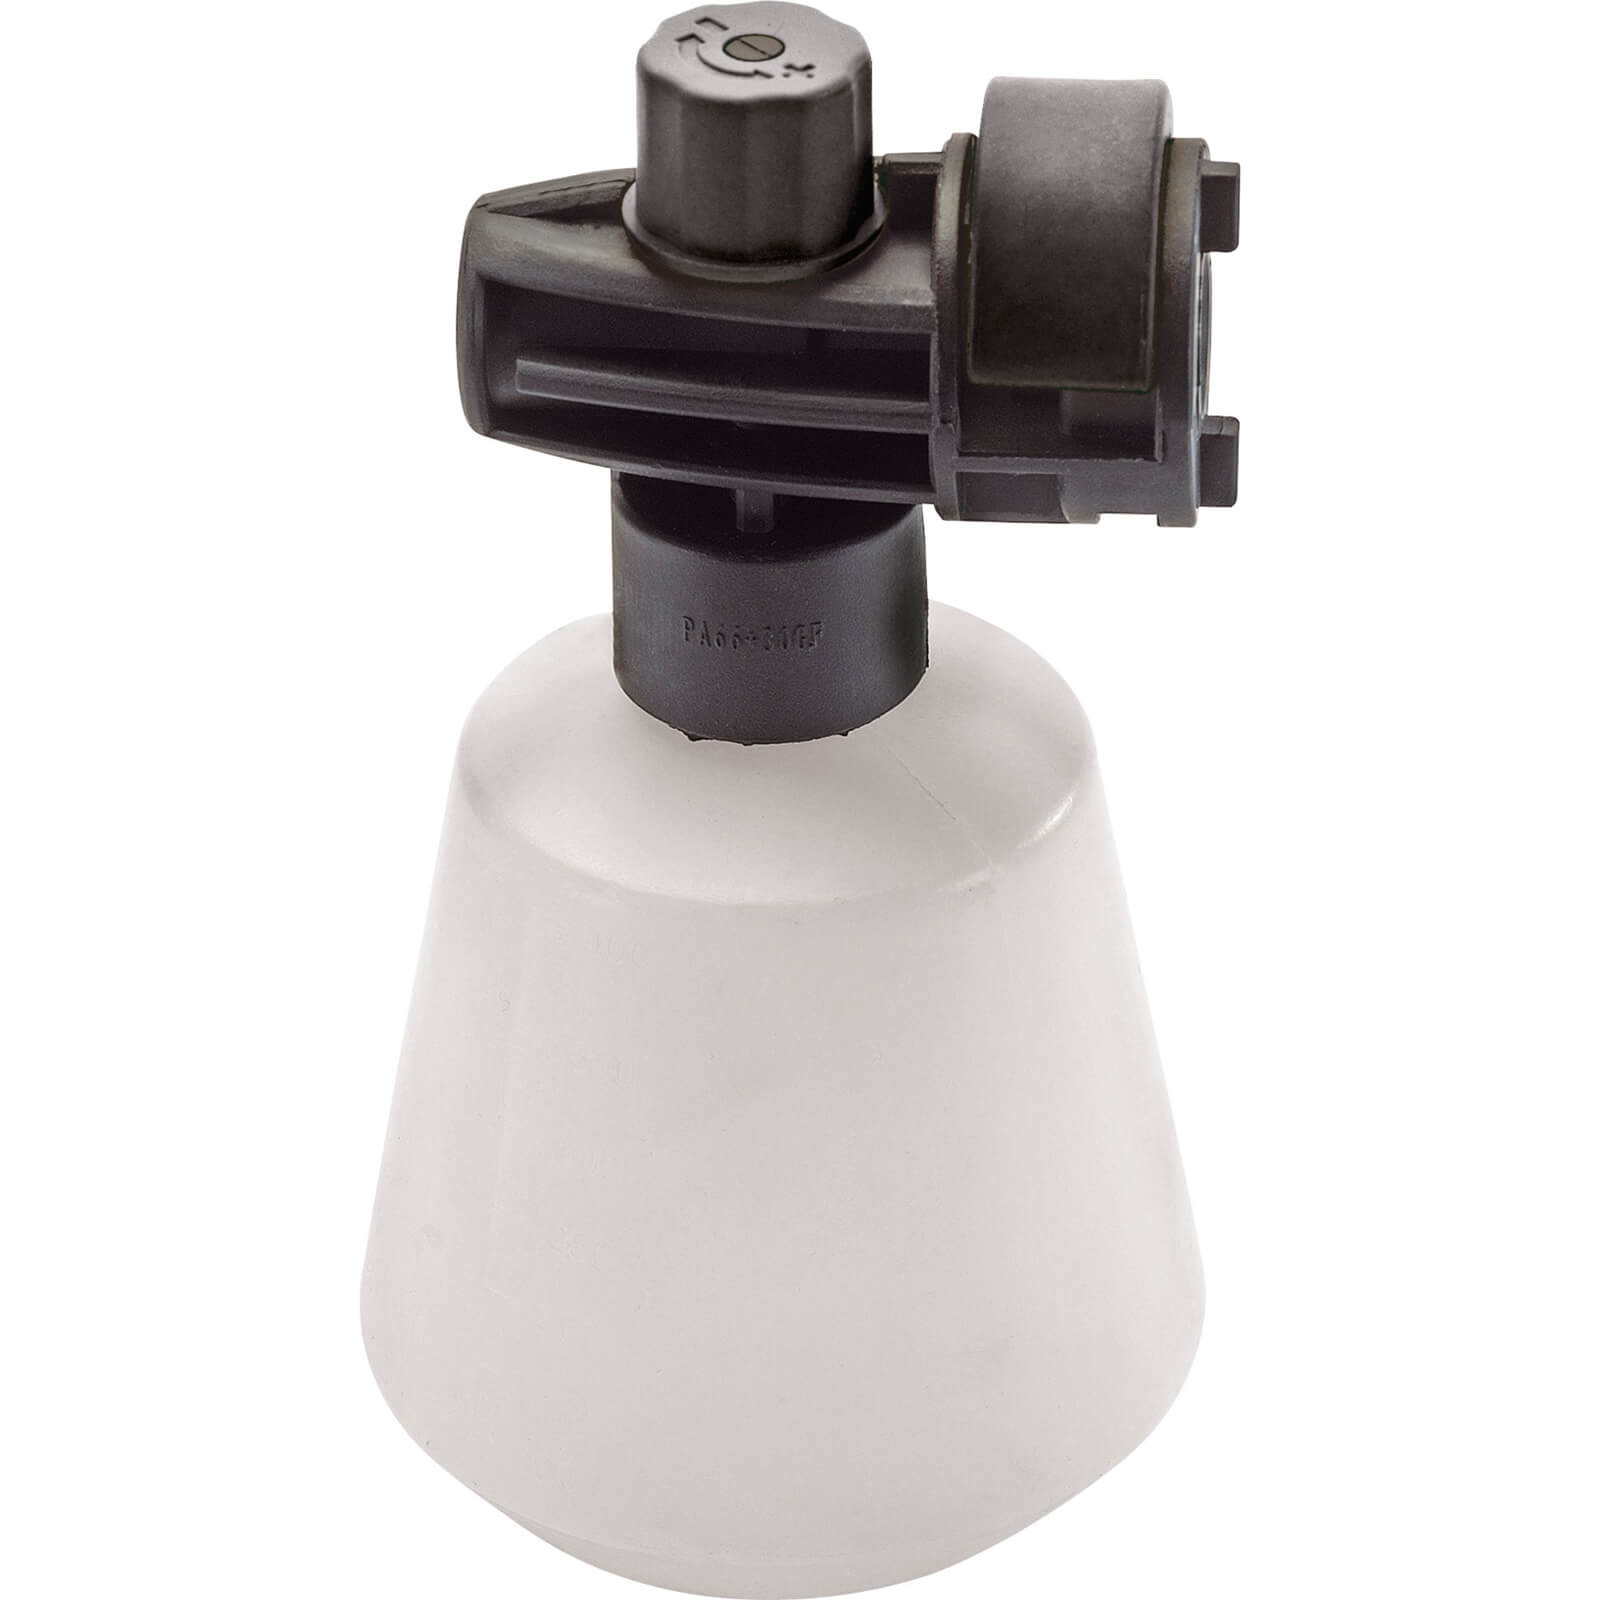 Image of Draper Detergent Bottle for 83405, 83506 and 83407 Pressure Washers